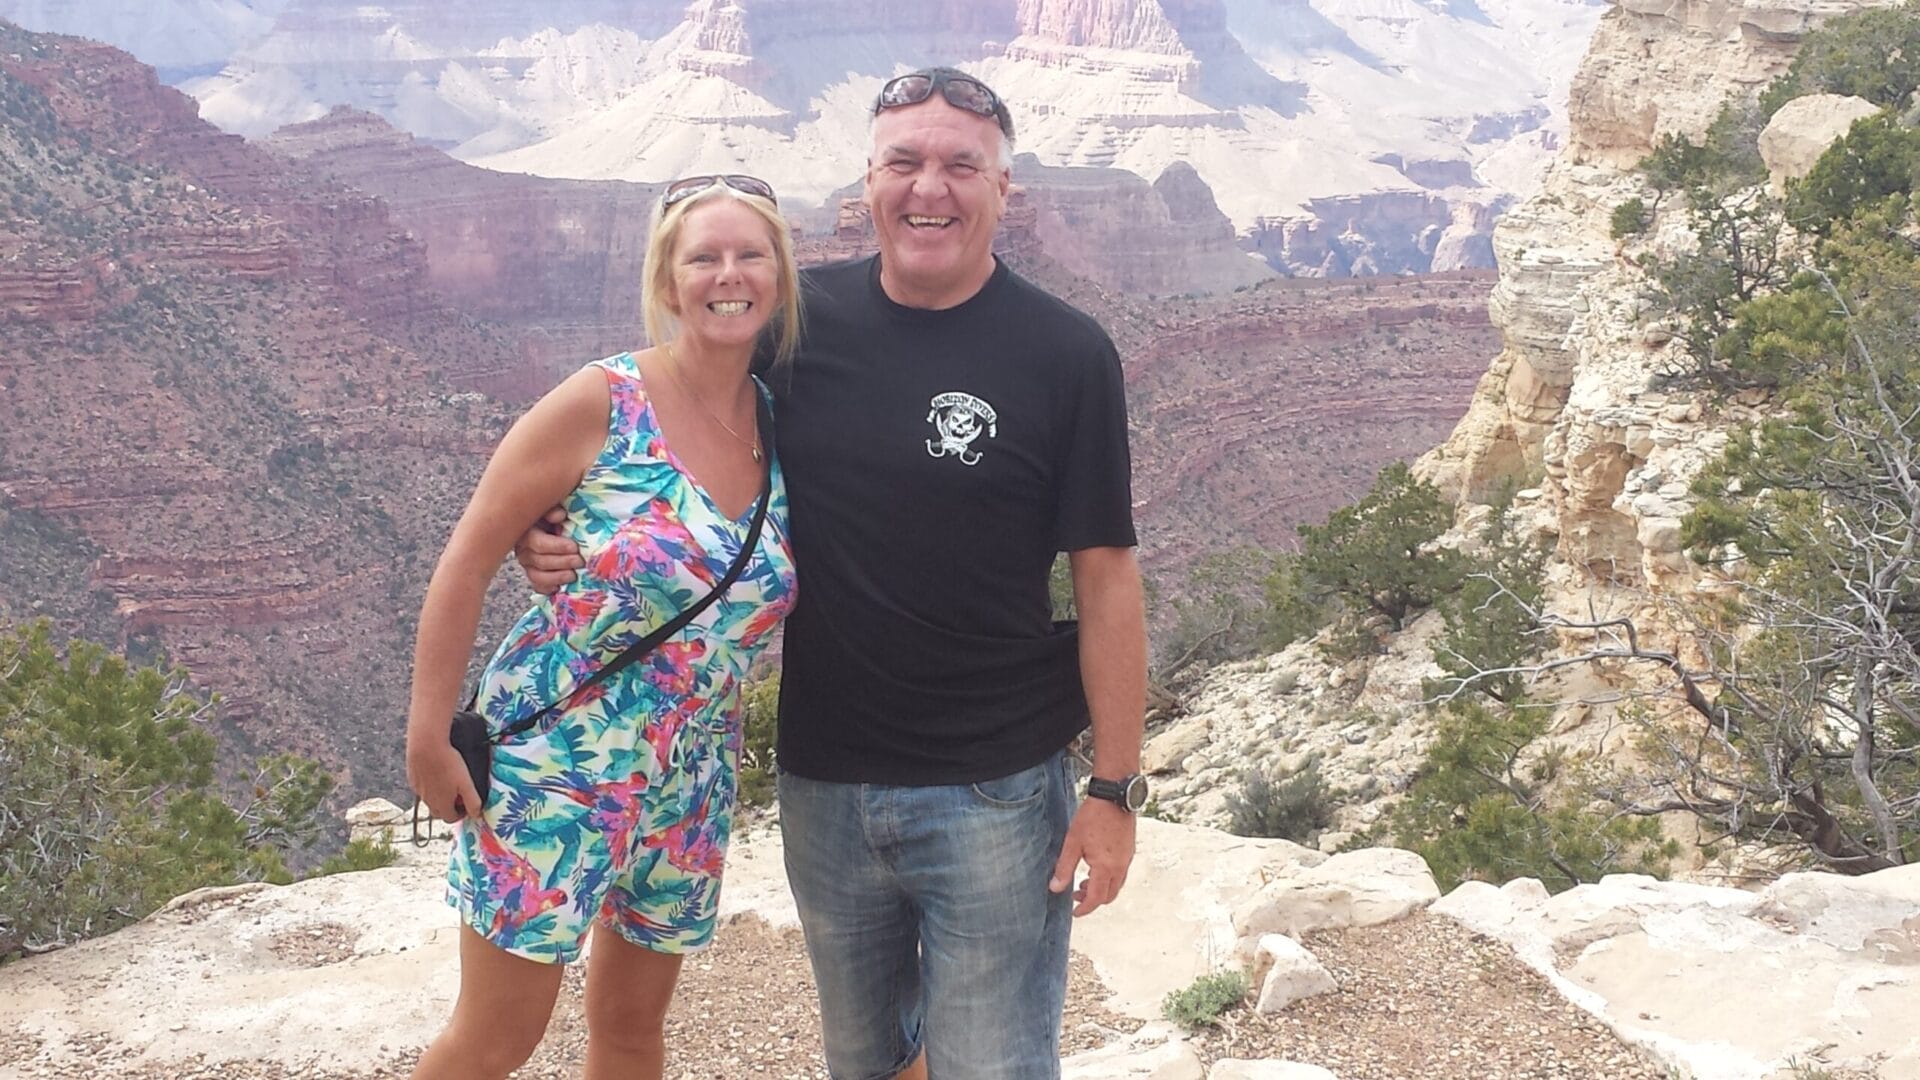 Road Trip from Las Vegas to The Grand Canyon. At The Grand Canyon The Backpacking Housewife